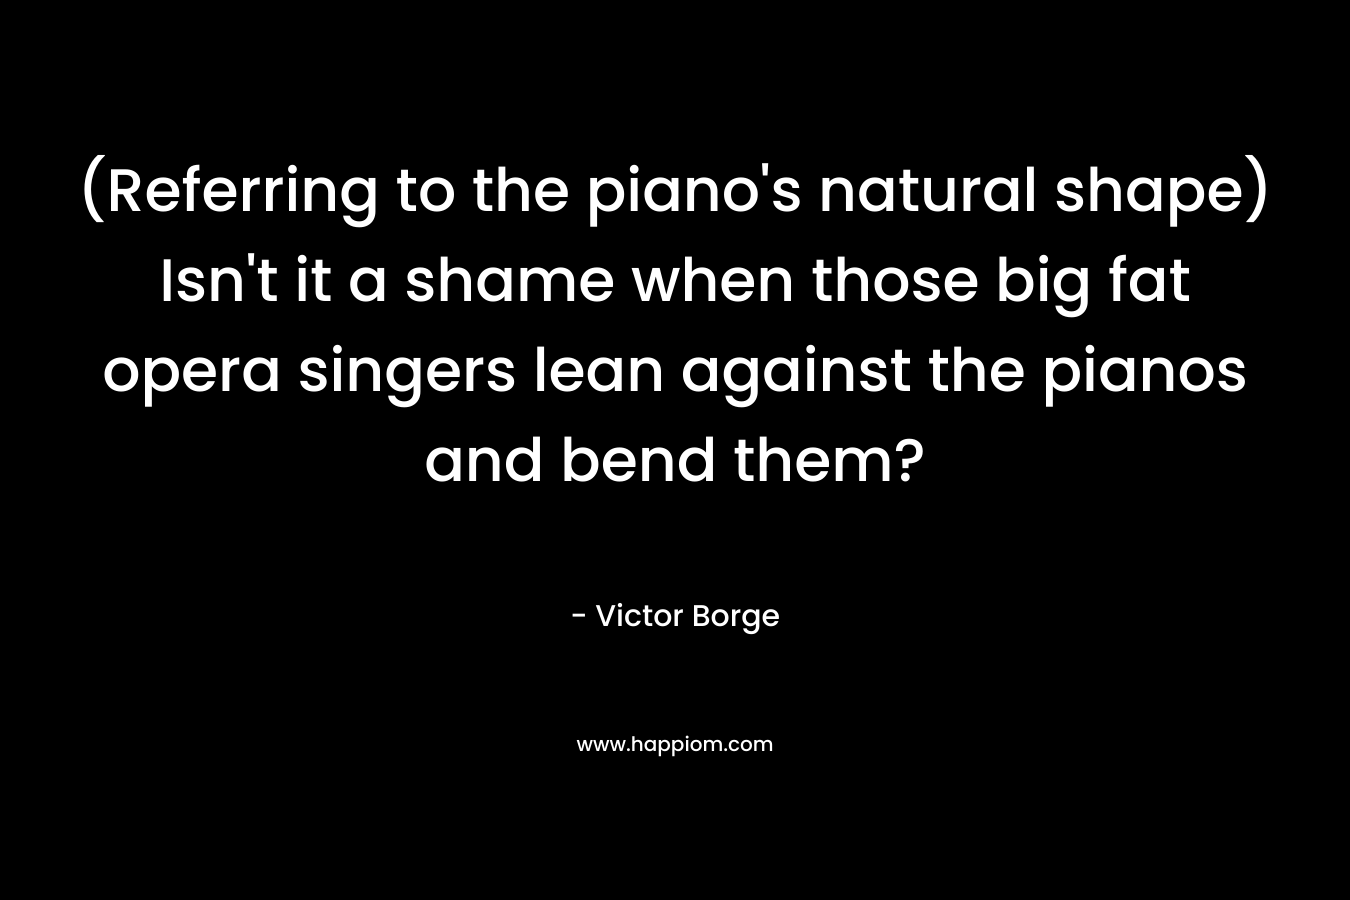 (Referring to the piano's natural shape) Isn't it a shame when those big fat opera singers lean against the pianos and bend them?